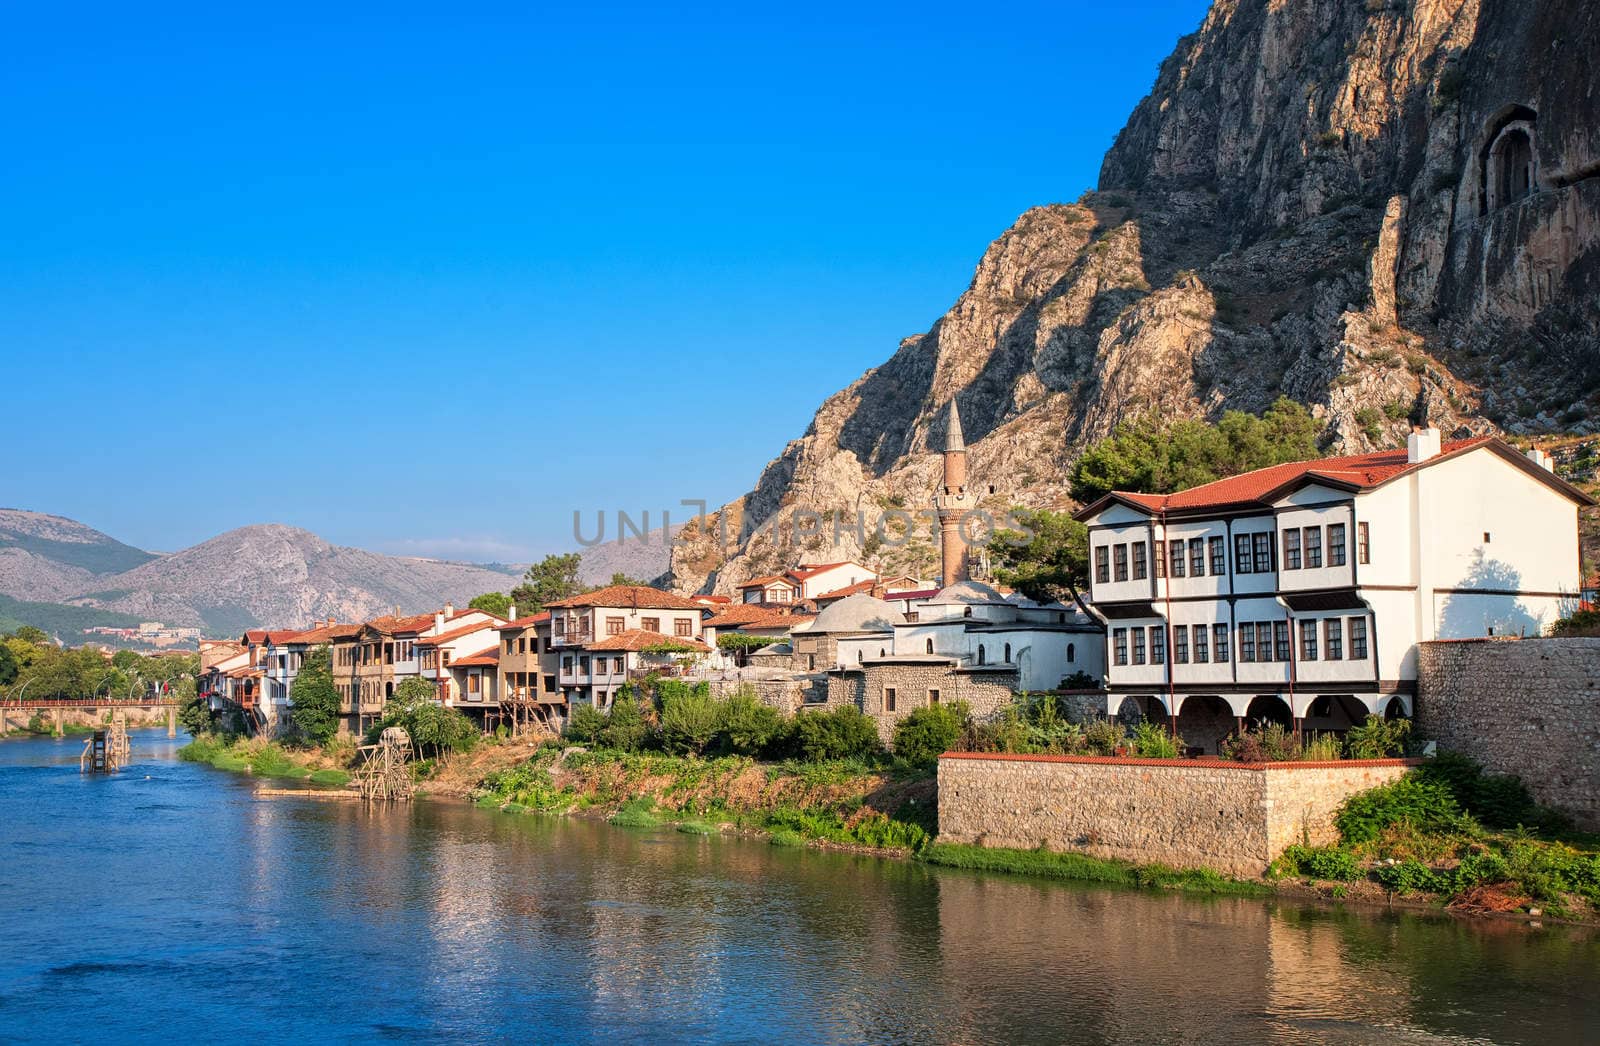 Well preserved old ottoman architecture and Pontus kings tombs in Amasya, central Anatolia, Turkey